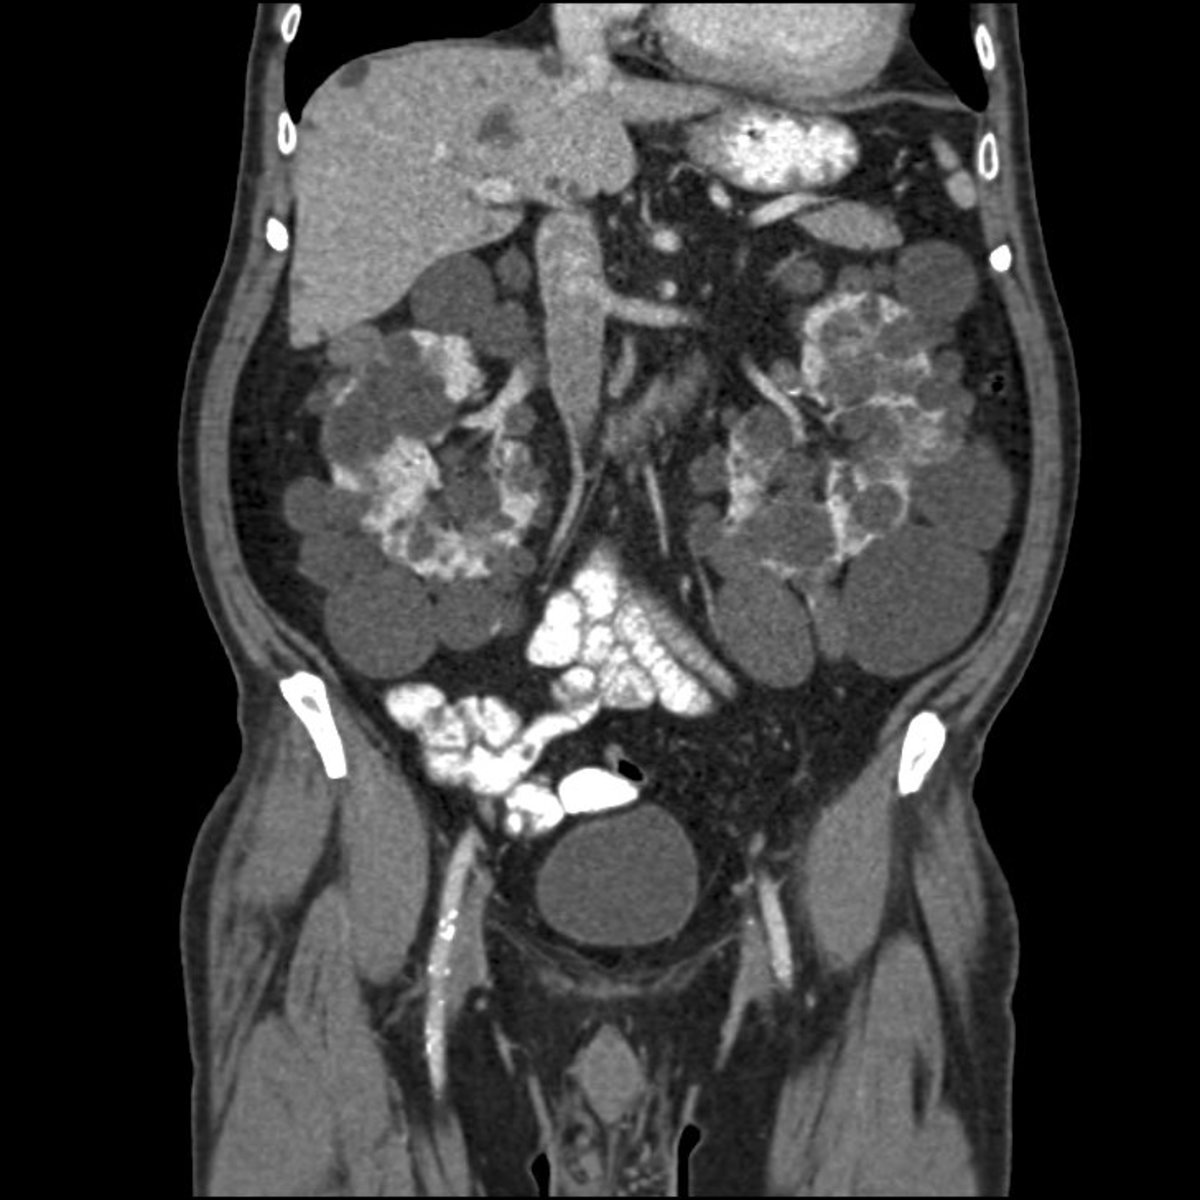 Abdominal CT scan of an adult with autosomal dominant polycystic kidney disease. Extensive cyst formation is seen over both kidneys, with a few cysts in the liver as well.